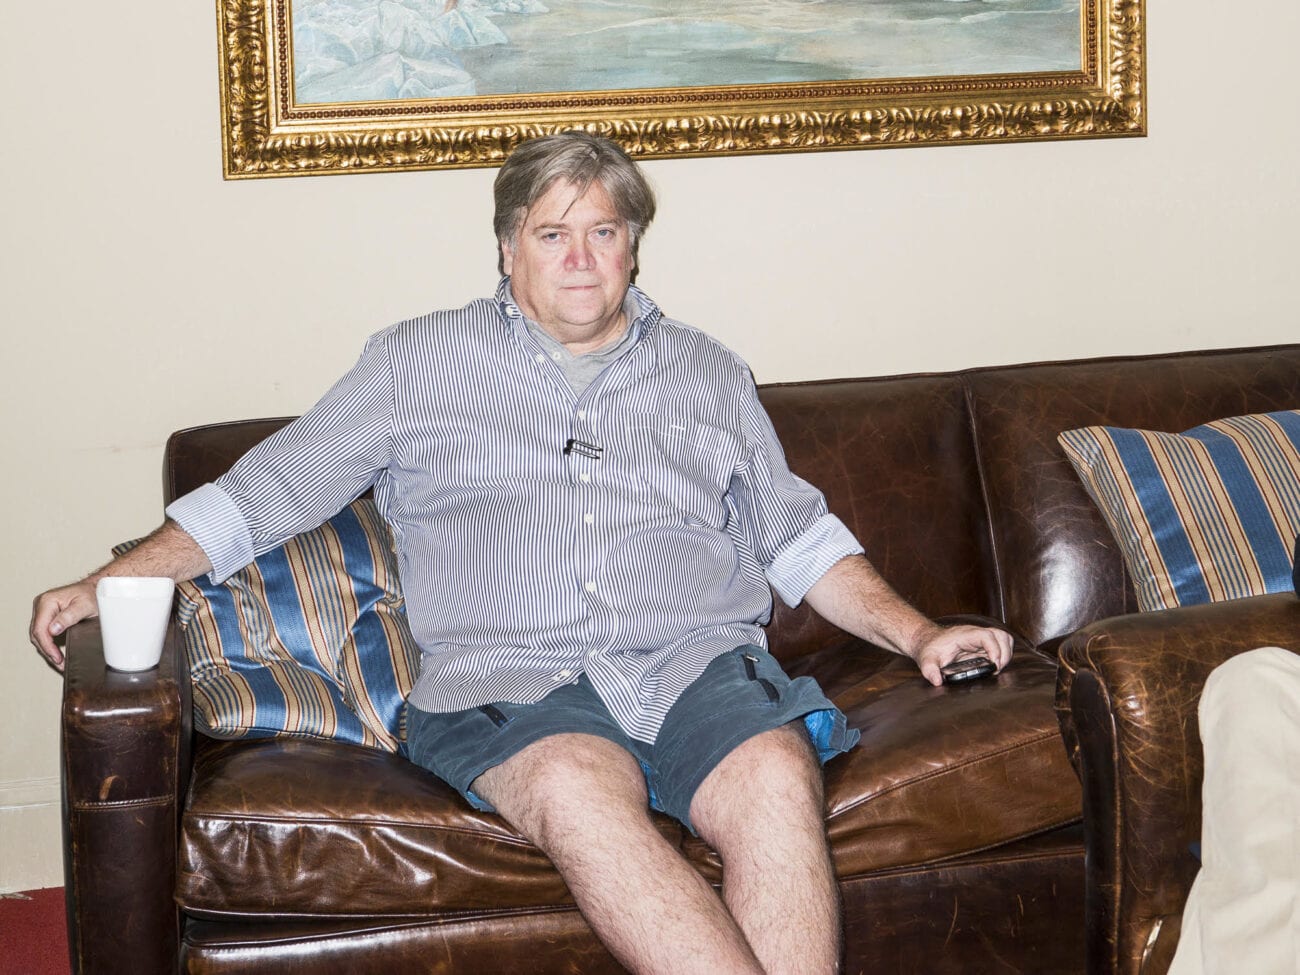 Did you know Steve Bannon raised money to build the Mexican wall, but used it to line his pockets instead? Delve into the timeline of his crimes here.